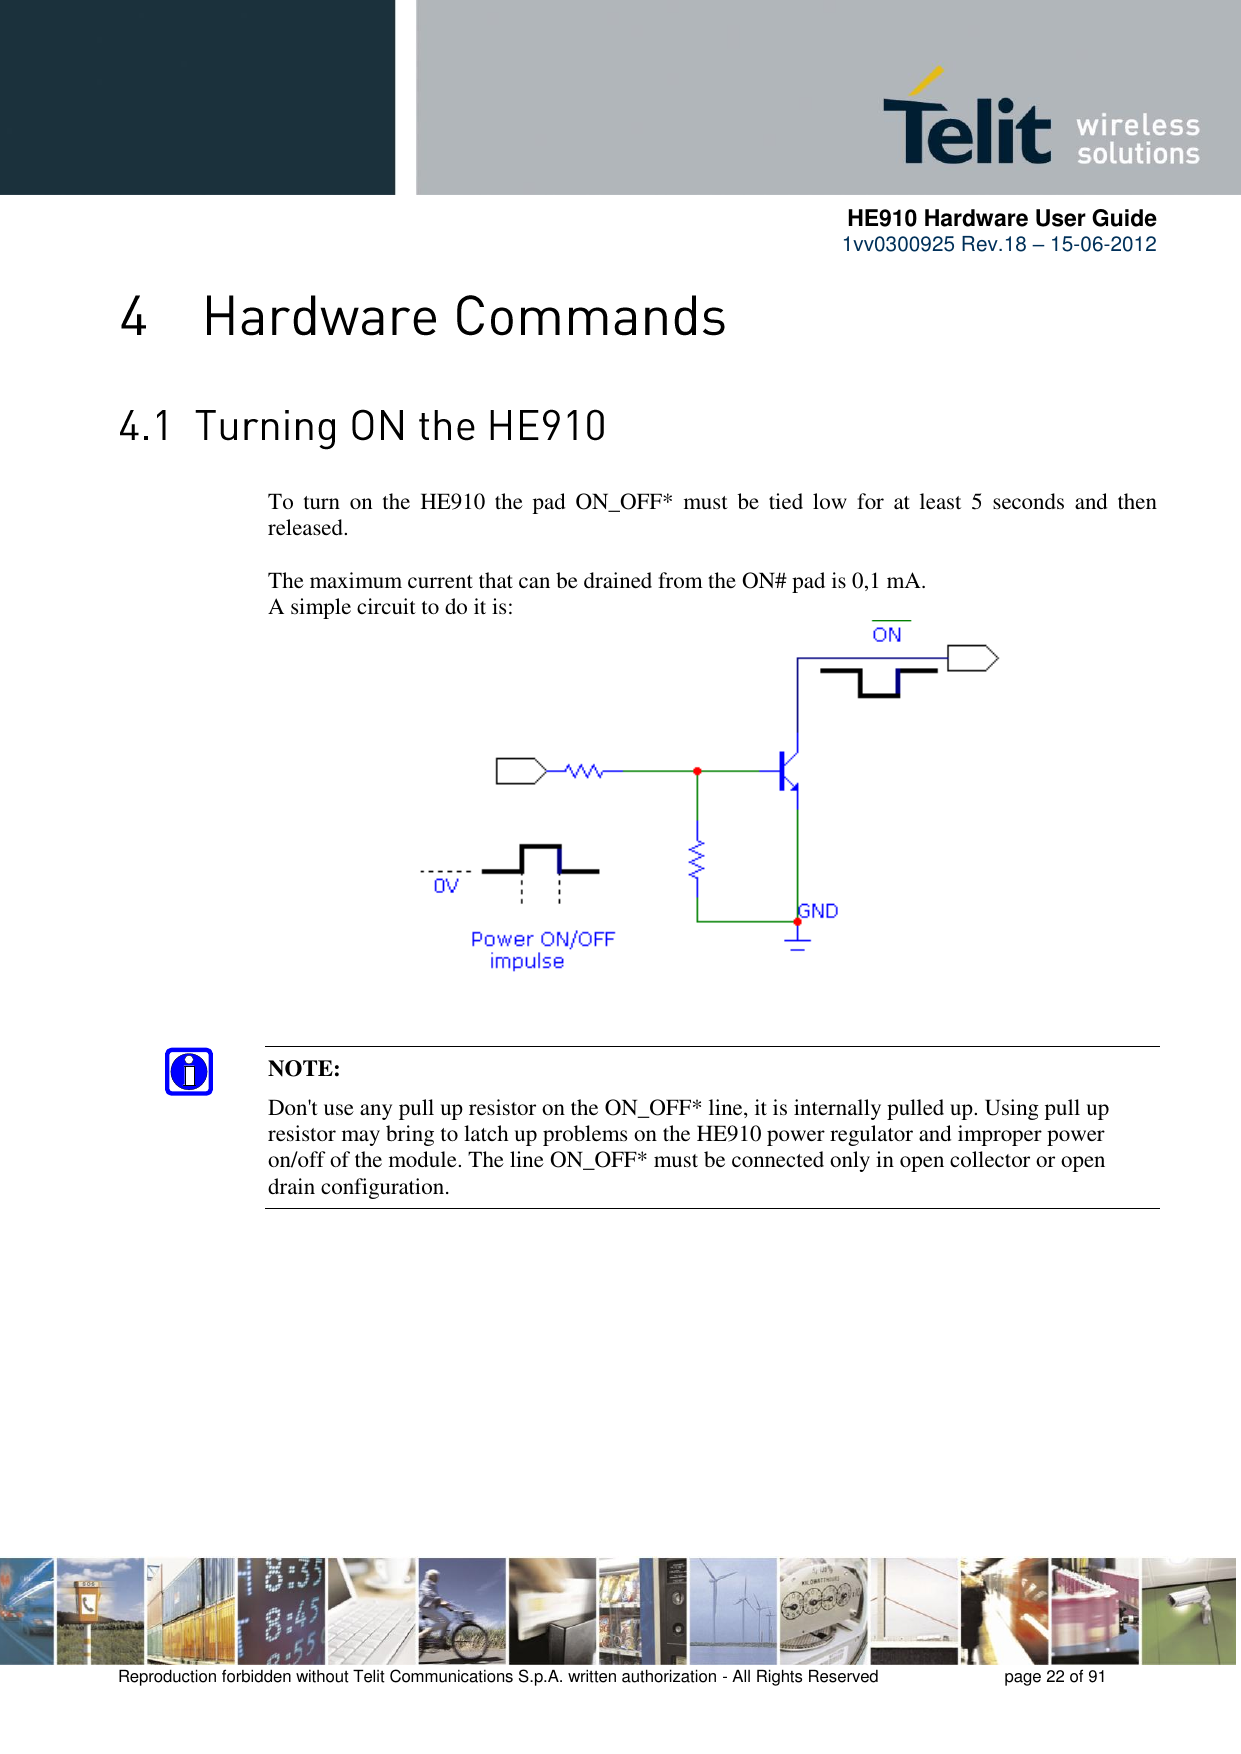      HE910 Hardware User Guide 1vv0300925 Rev.18 – 15-06-2012    Reproduction forbidden without Telit Communications S.p.A. written authorization - All Rights Reserved    page 22 of 91    To  turn  on  the  HE910  the  pad  ON_OFF*  must  be  tied  low  for  at  least  5  seconds  and  then released.  The maximum current that can be drained from the ON# pad is 0,1 mA. A simple circuit to do it is: NOTE: Don&apos;t use any pull up resistor on the ON_OFF* line, it is internally pulled up. Using pull up resistor may bring to latch up problems on the HE910 power regulator and improper power on/off of the module. The line ON_OFF* must be connected only in open collector or open drain configuration. 